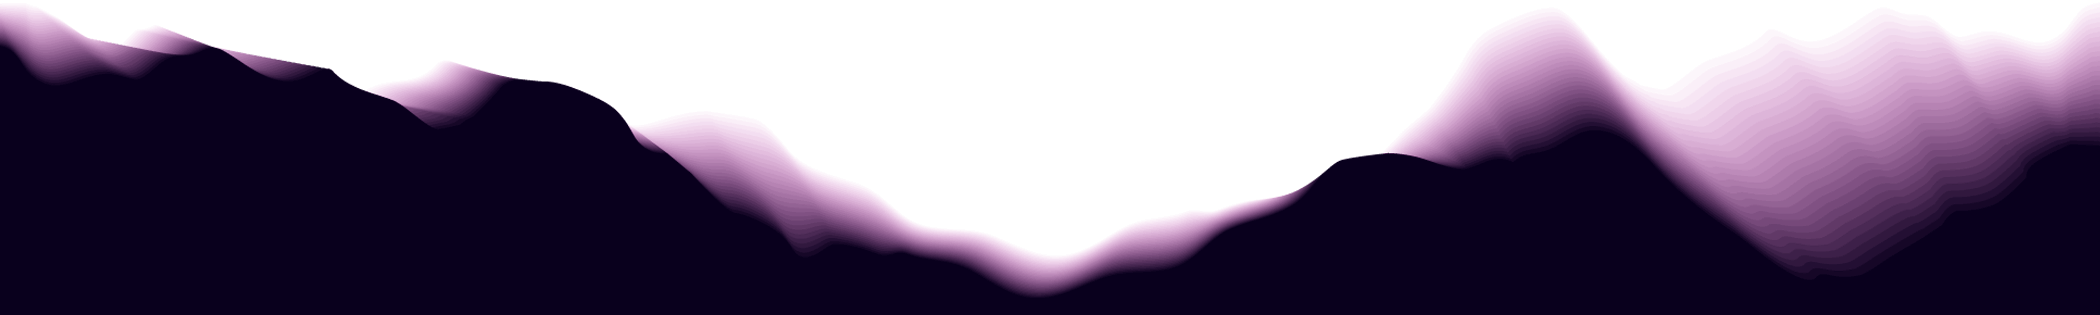 http://www.marabout-africain-bruxelles.com/wp-content/uploads/2018/05/purple_top_divider.png